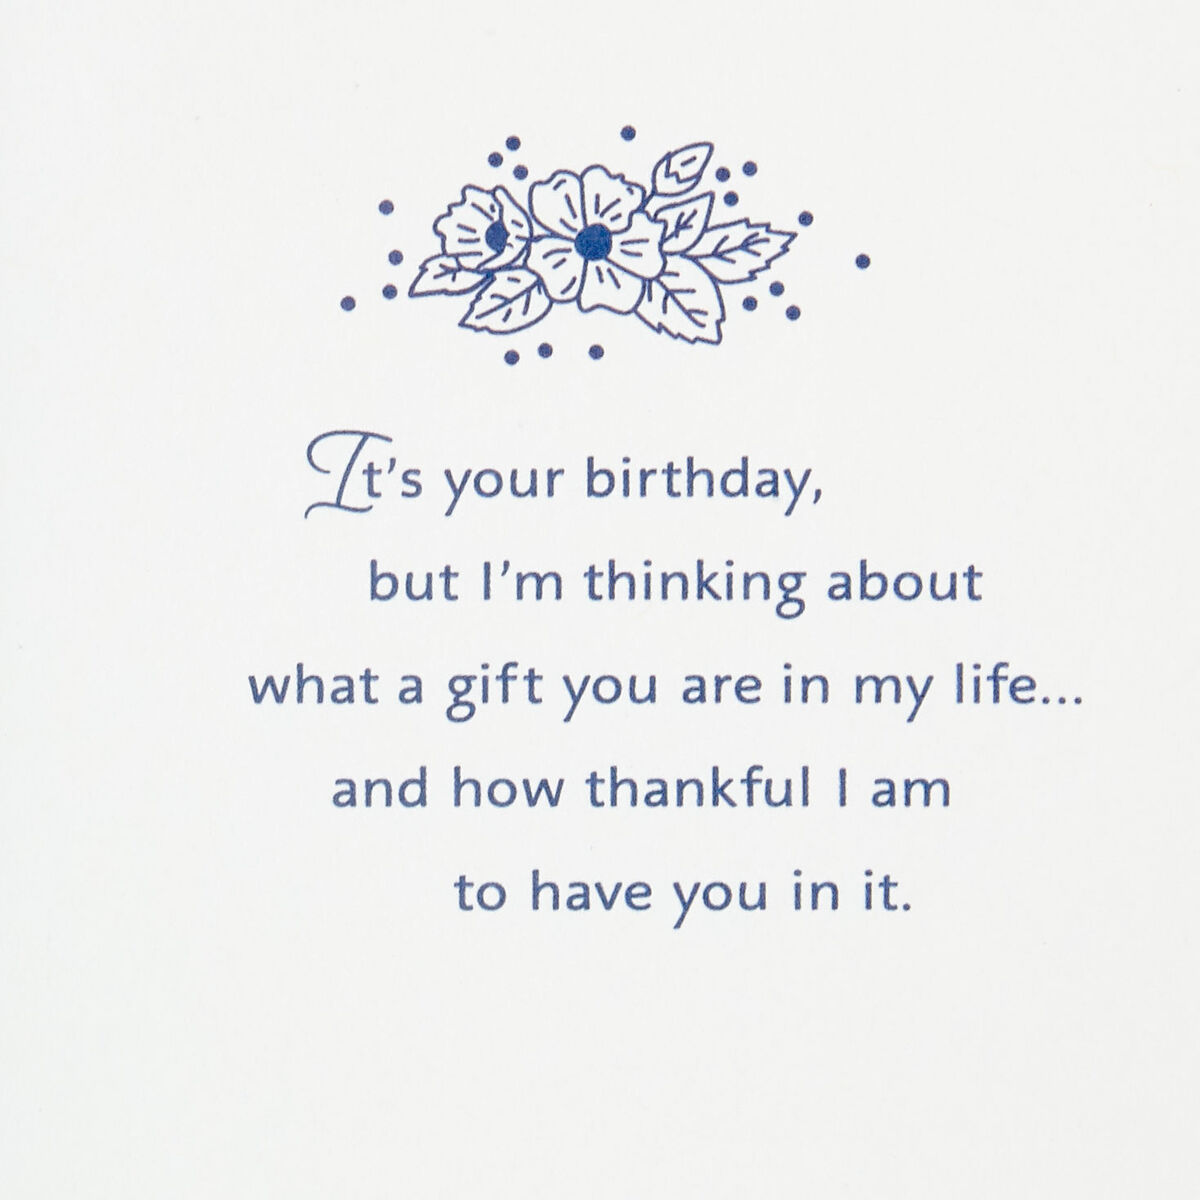 What a Gift You Are to Me Birthday Card - Greeting Cards - Hallmark